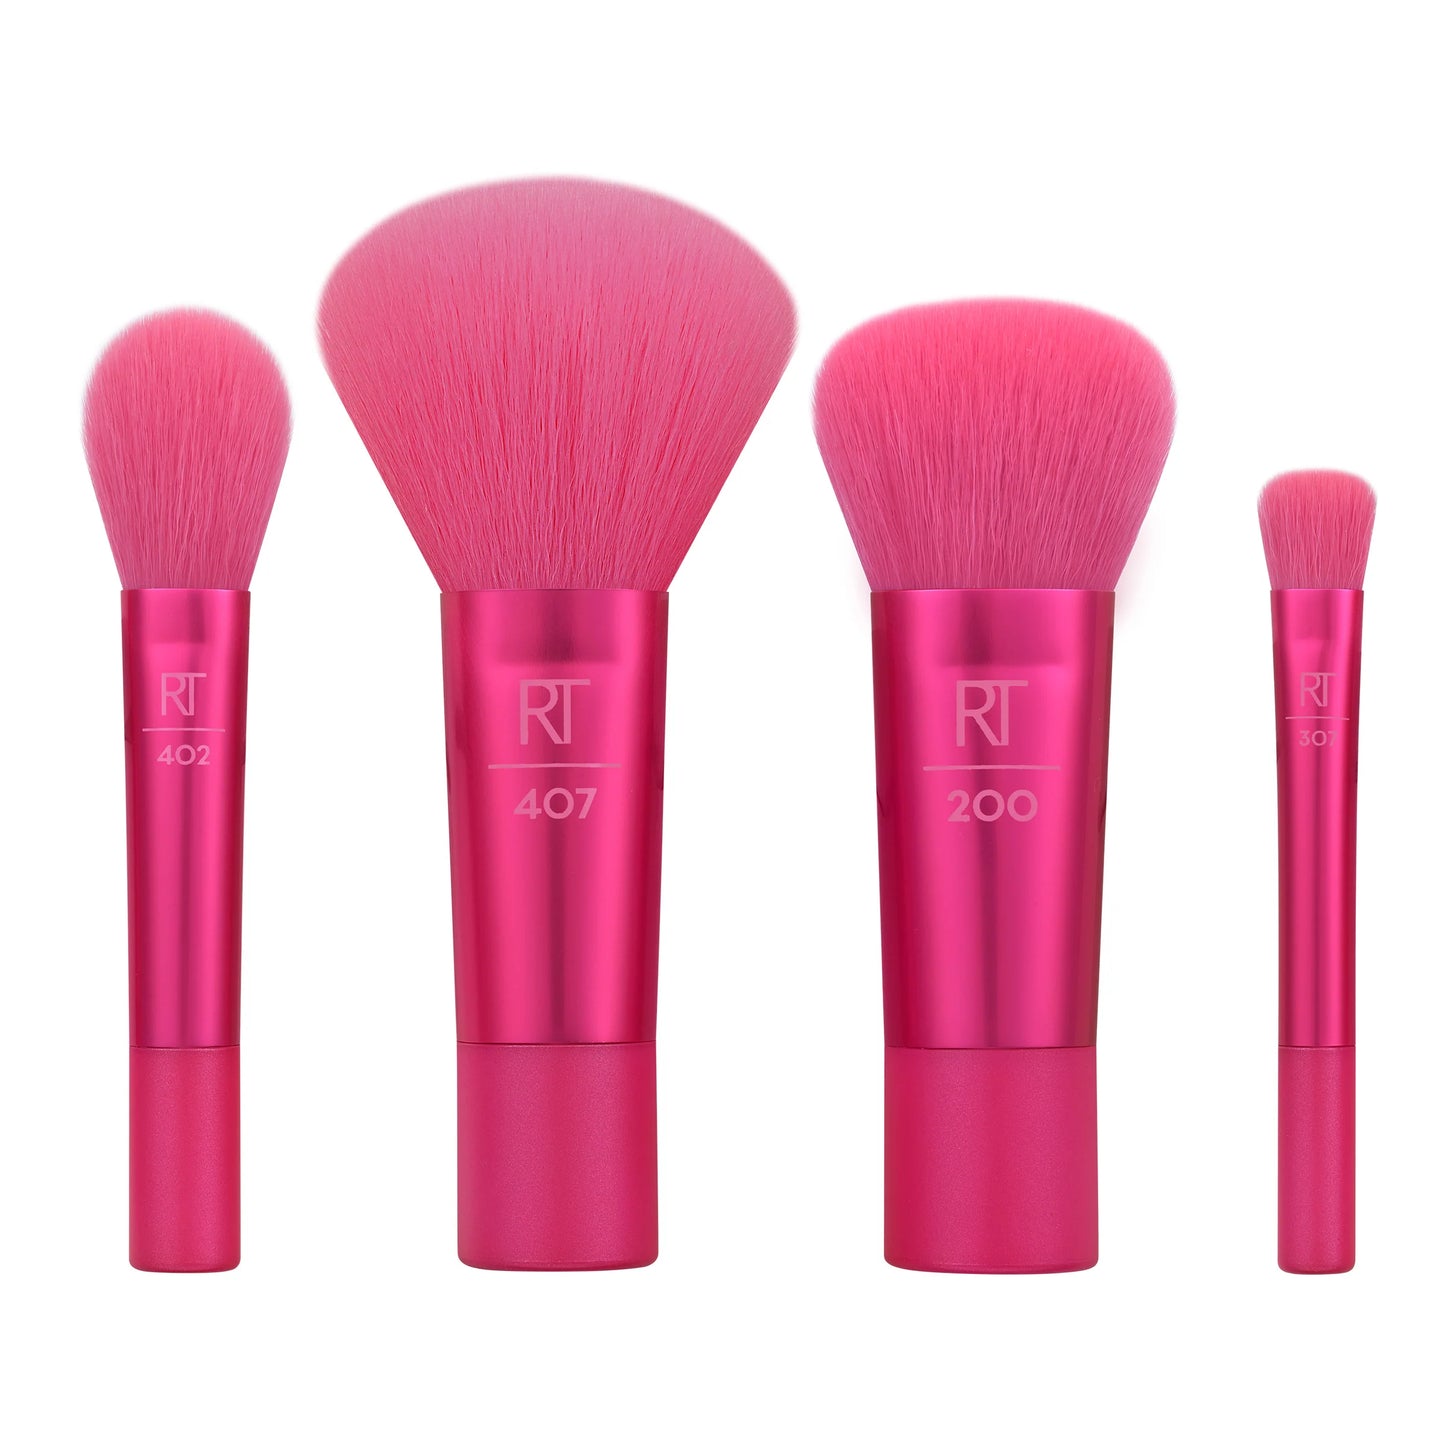 The Real Techniques High Shine Mini Brush Set Limited Edition